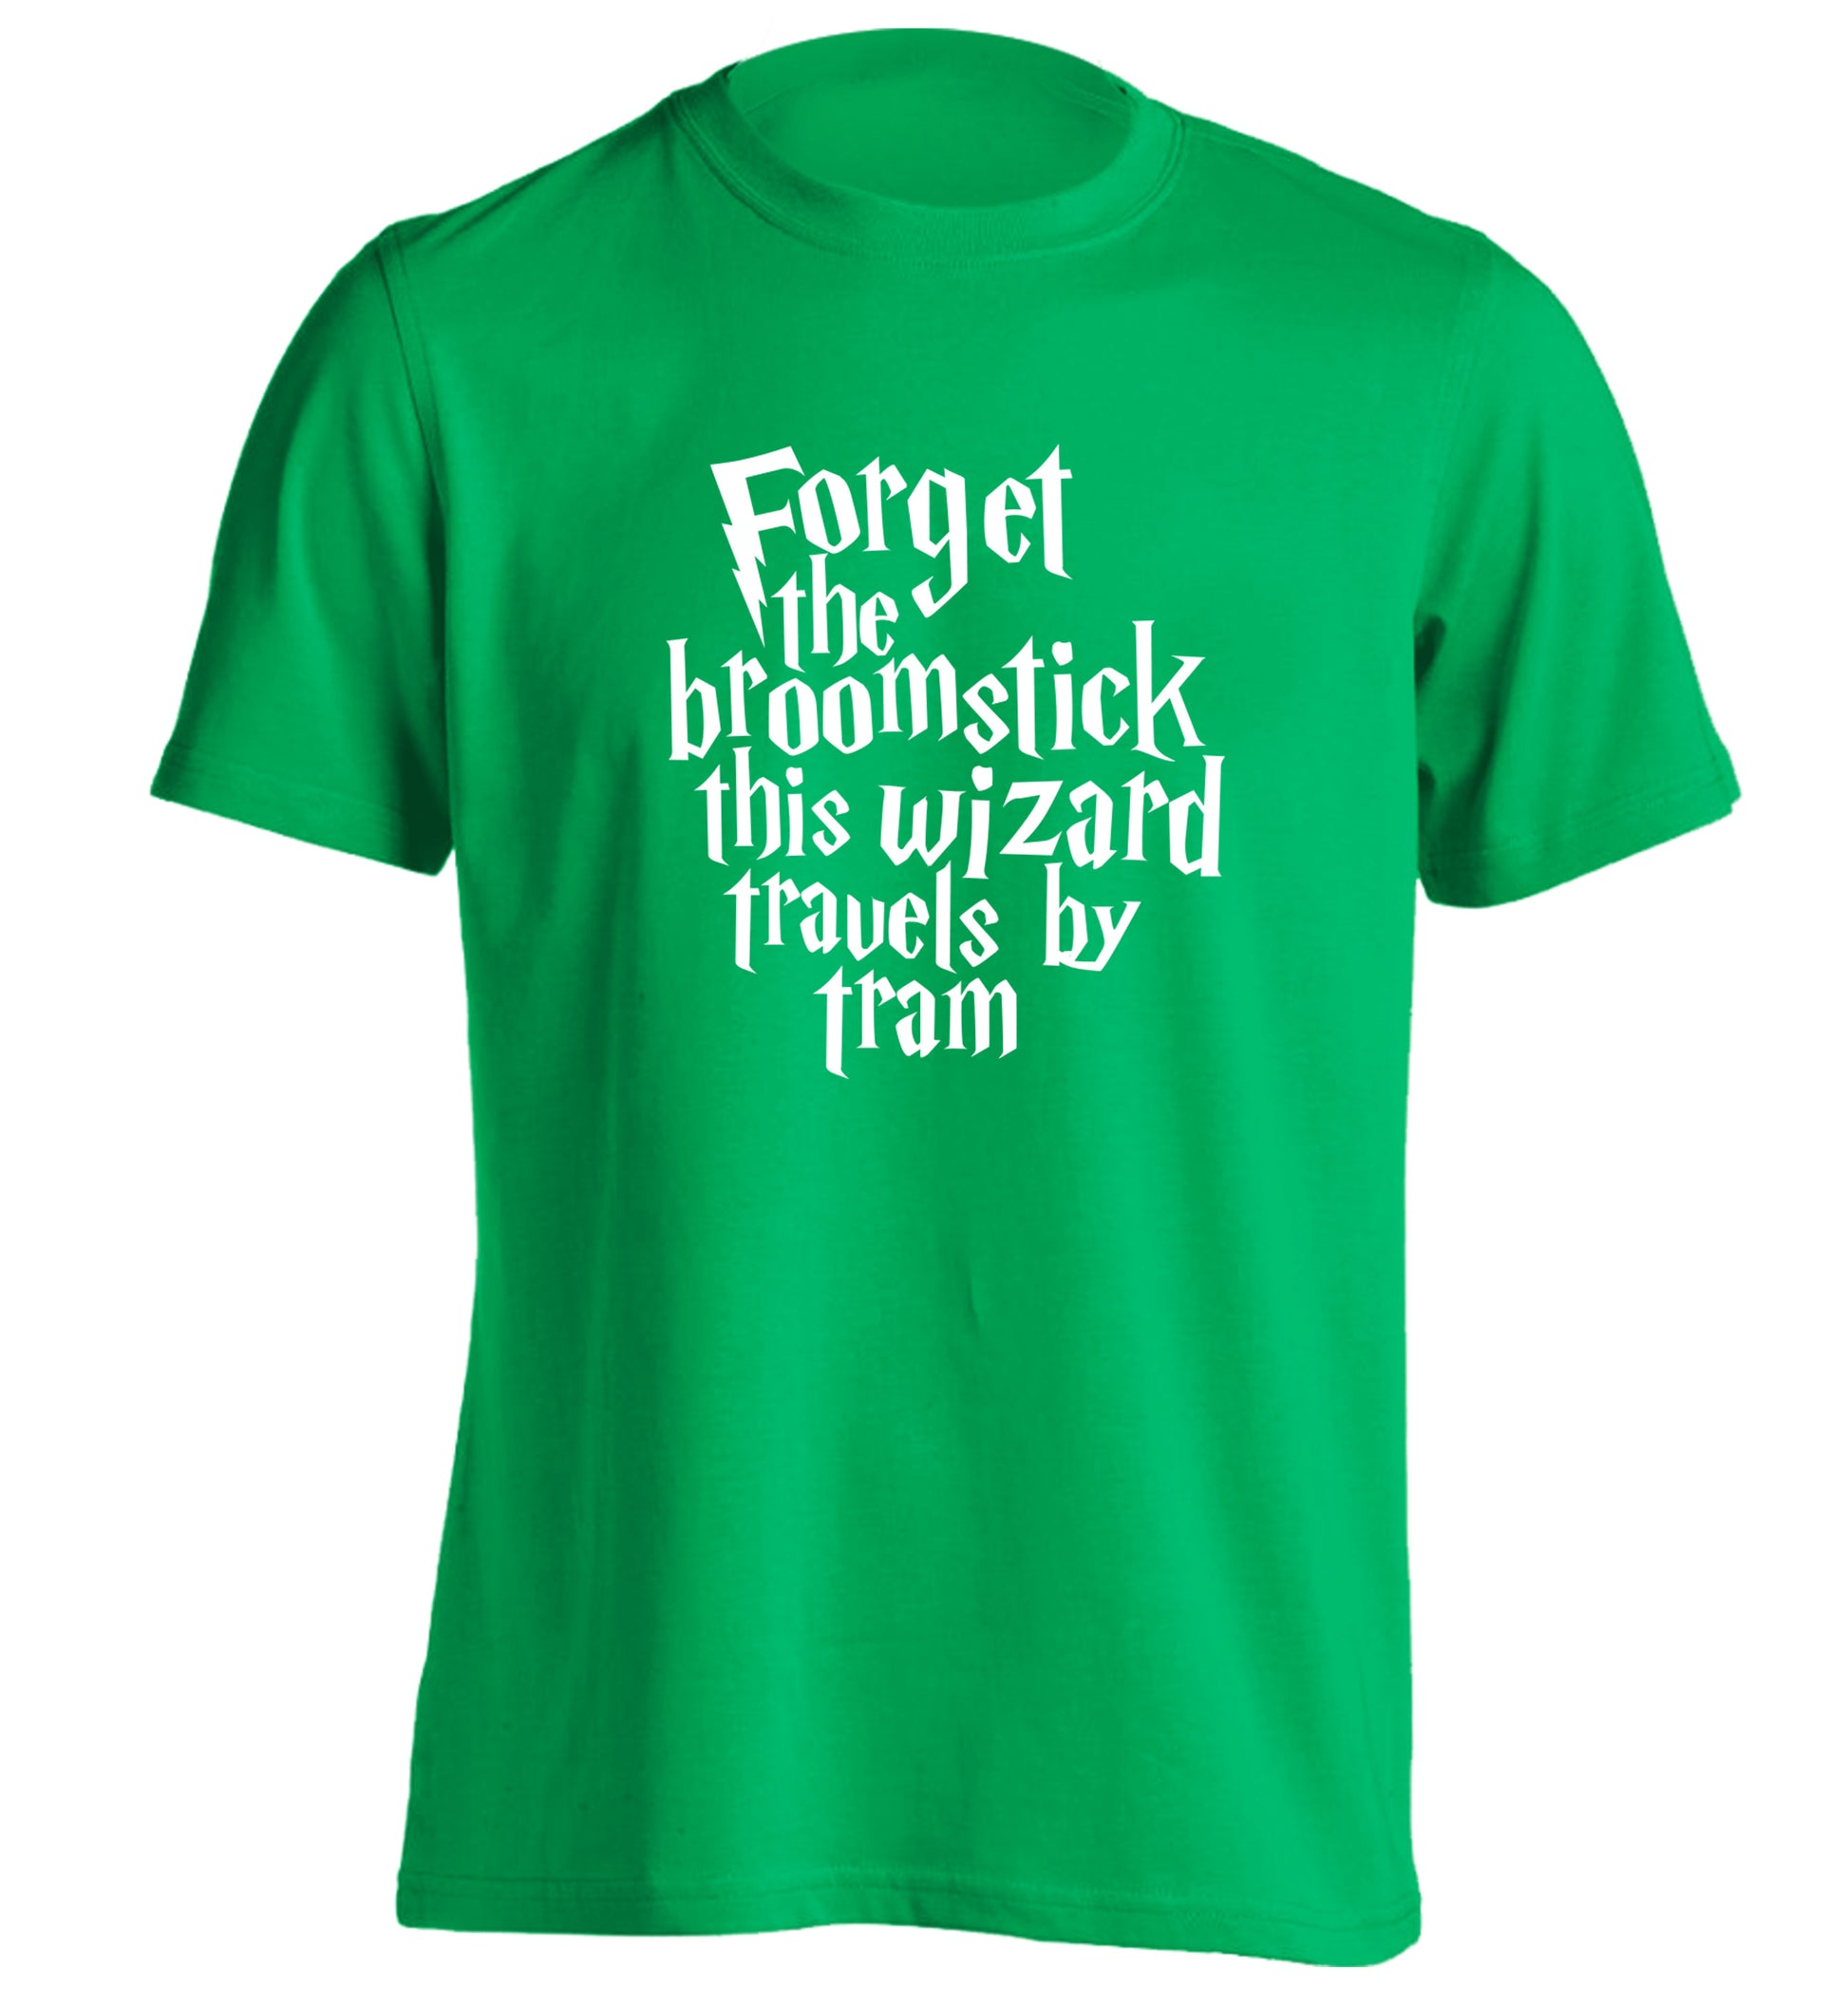 Forget the broomstick this wizard travels by tram adults unisexgreen Tshirt 2XL